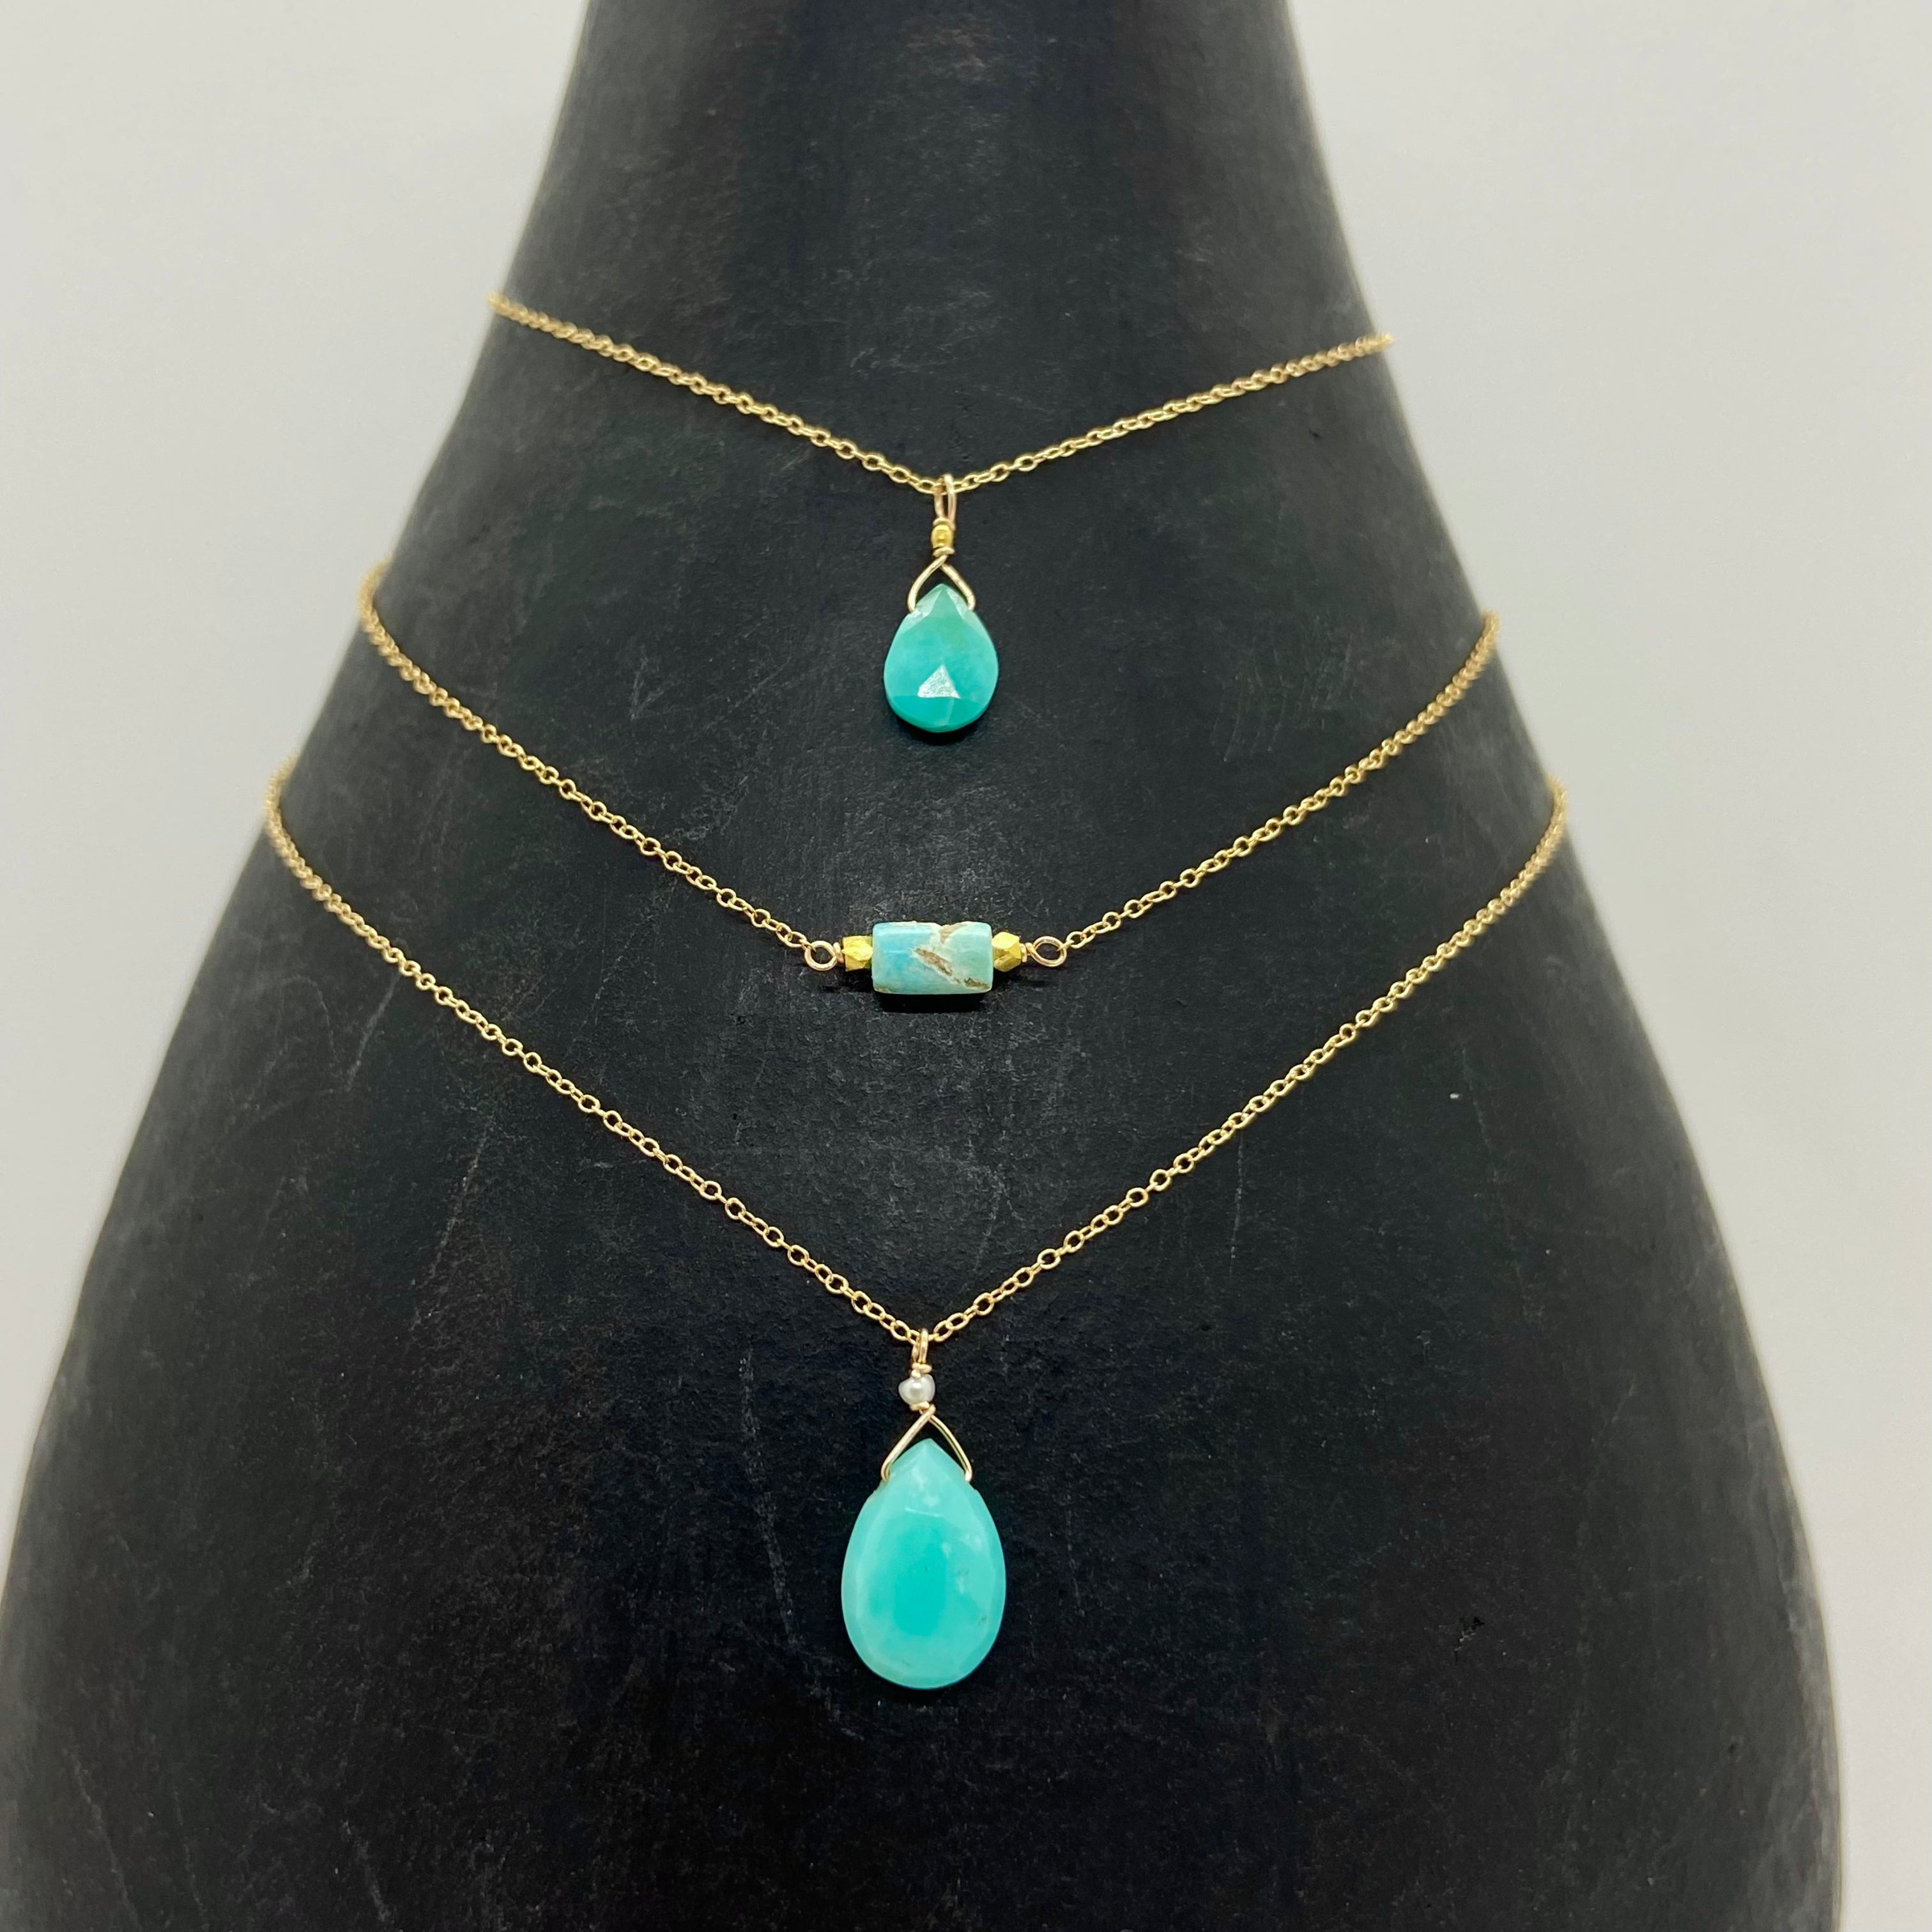 14k Gold Chain Necklace w/ Turquoise & Freshwater Pearl